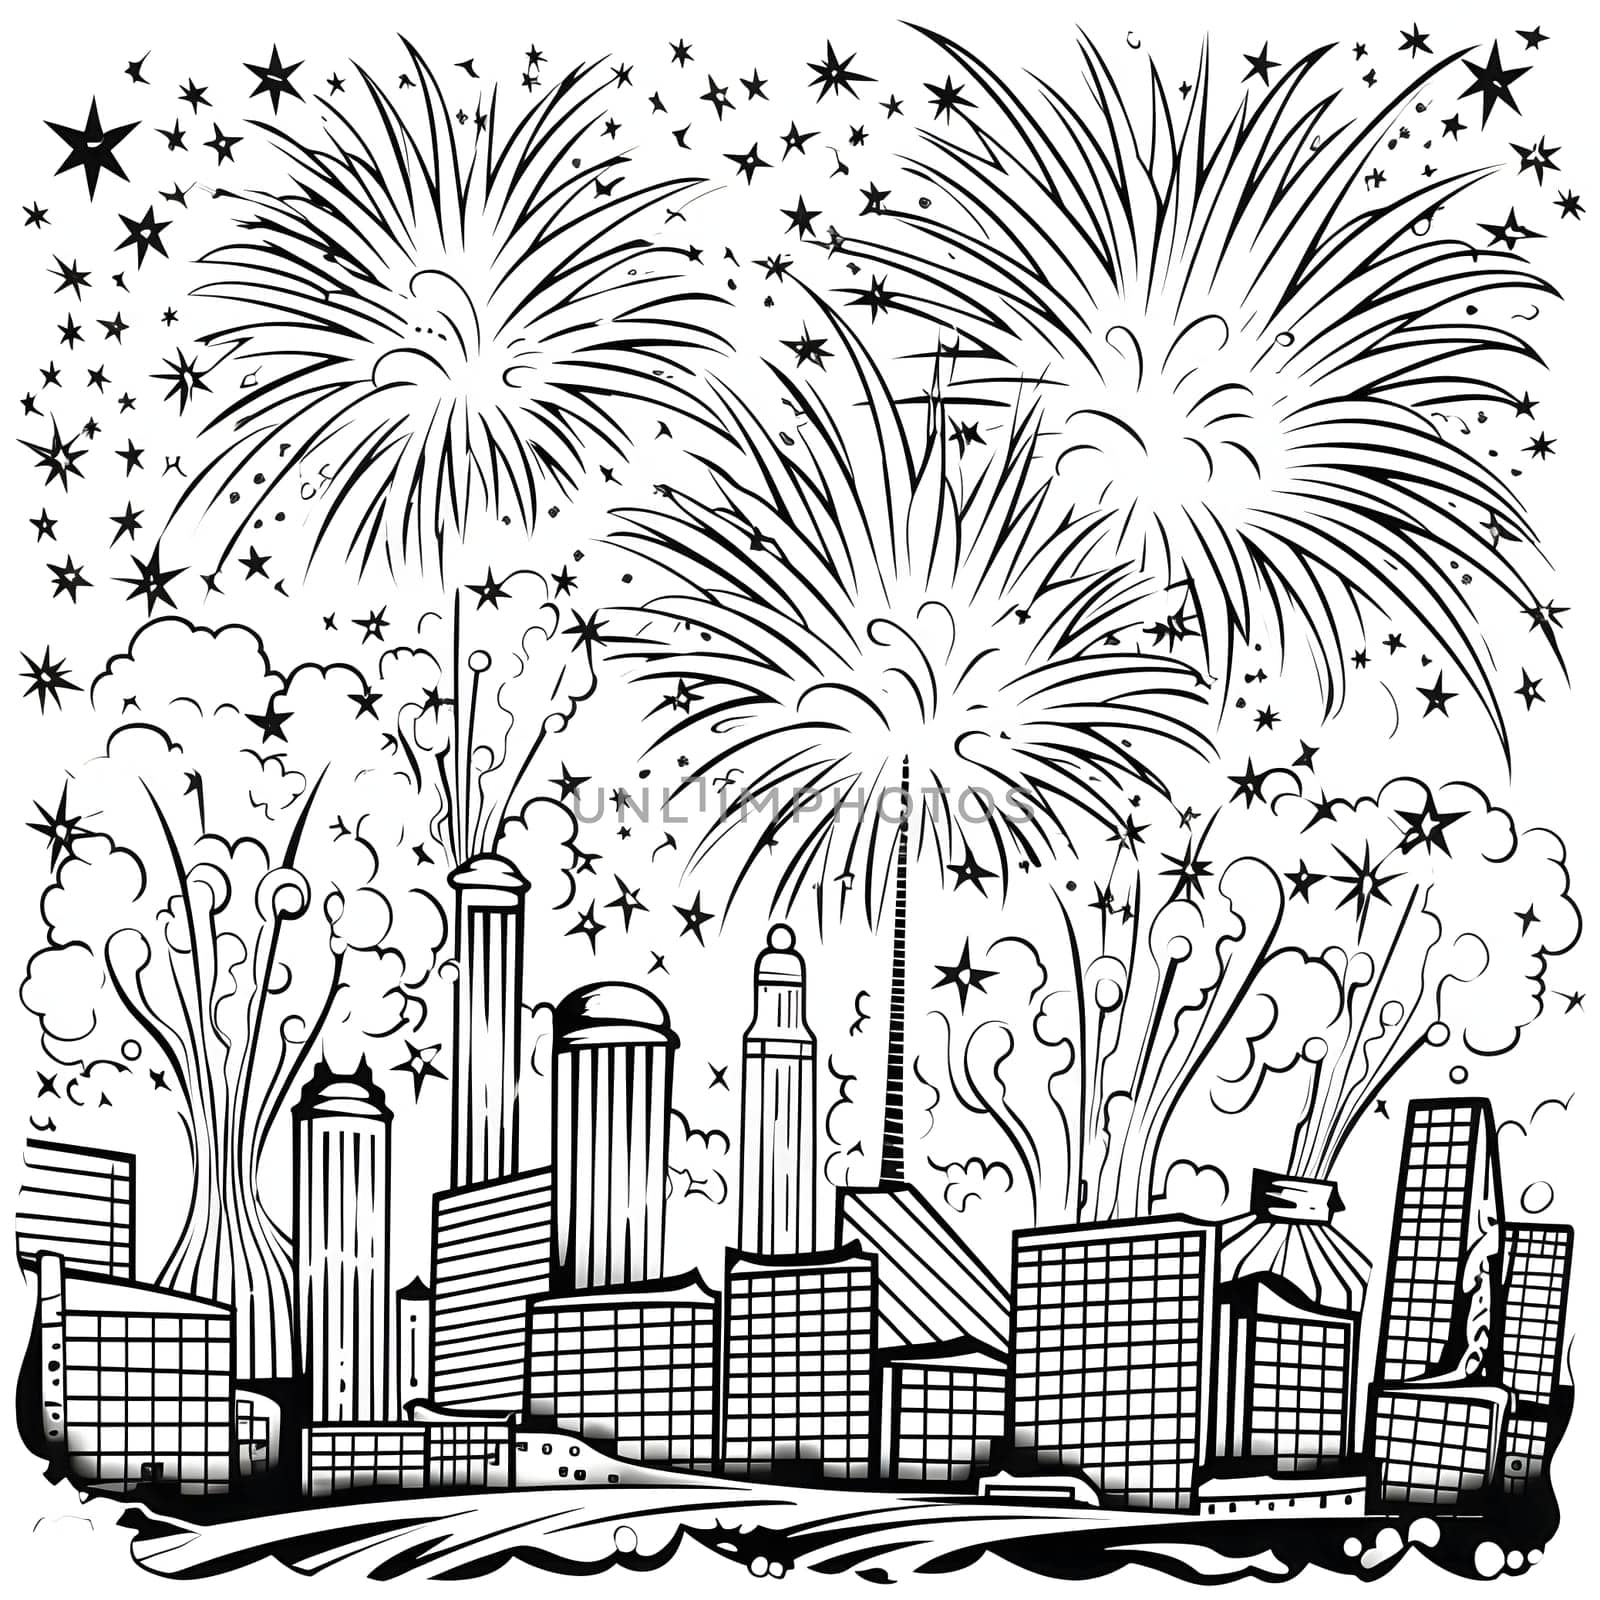 Urban skyscrapers and fireworks shooting in the sky. Black and White coloring sheet. New Year's fun and festivities. A time of celebration and resolutions.